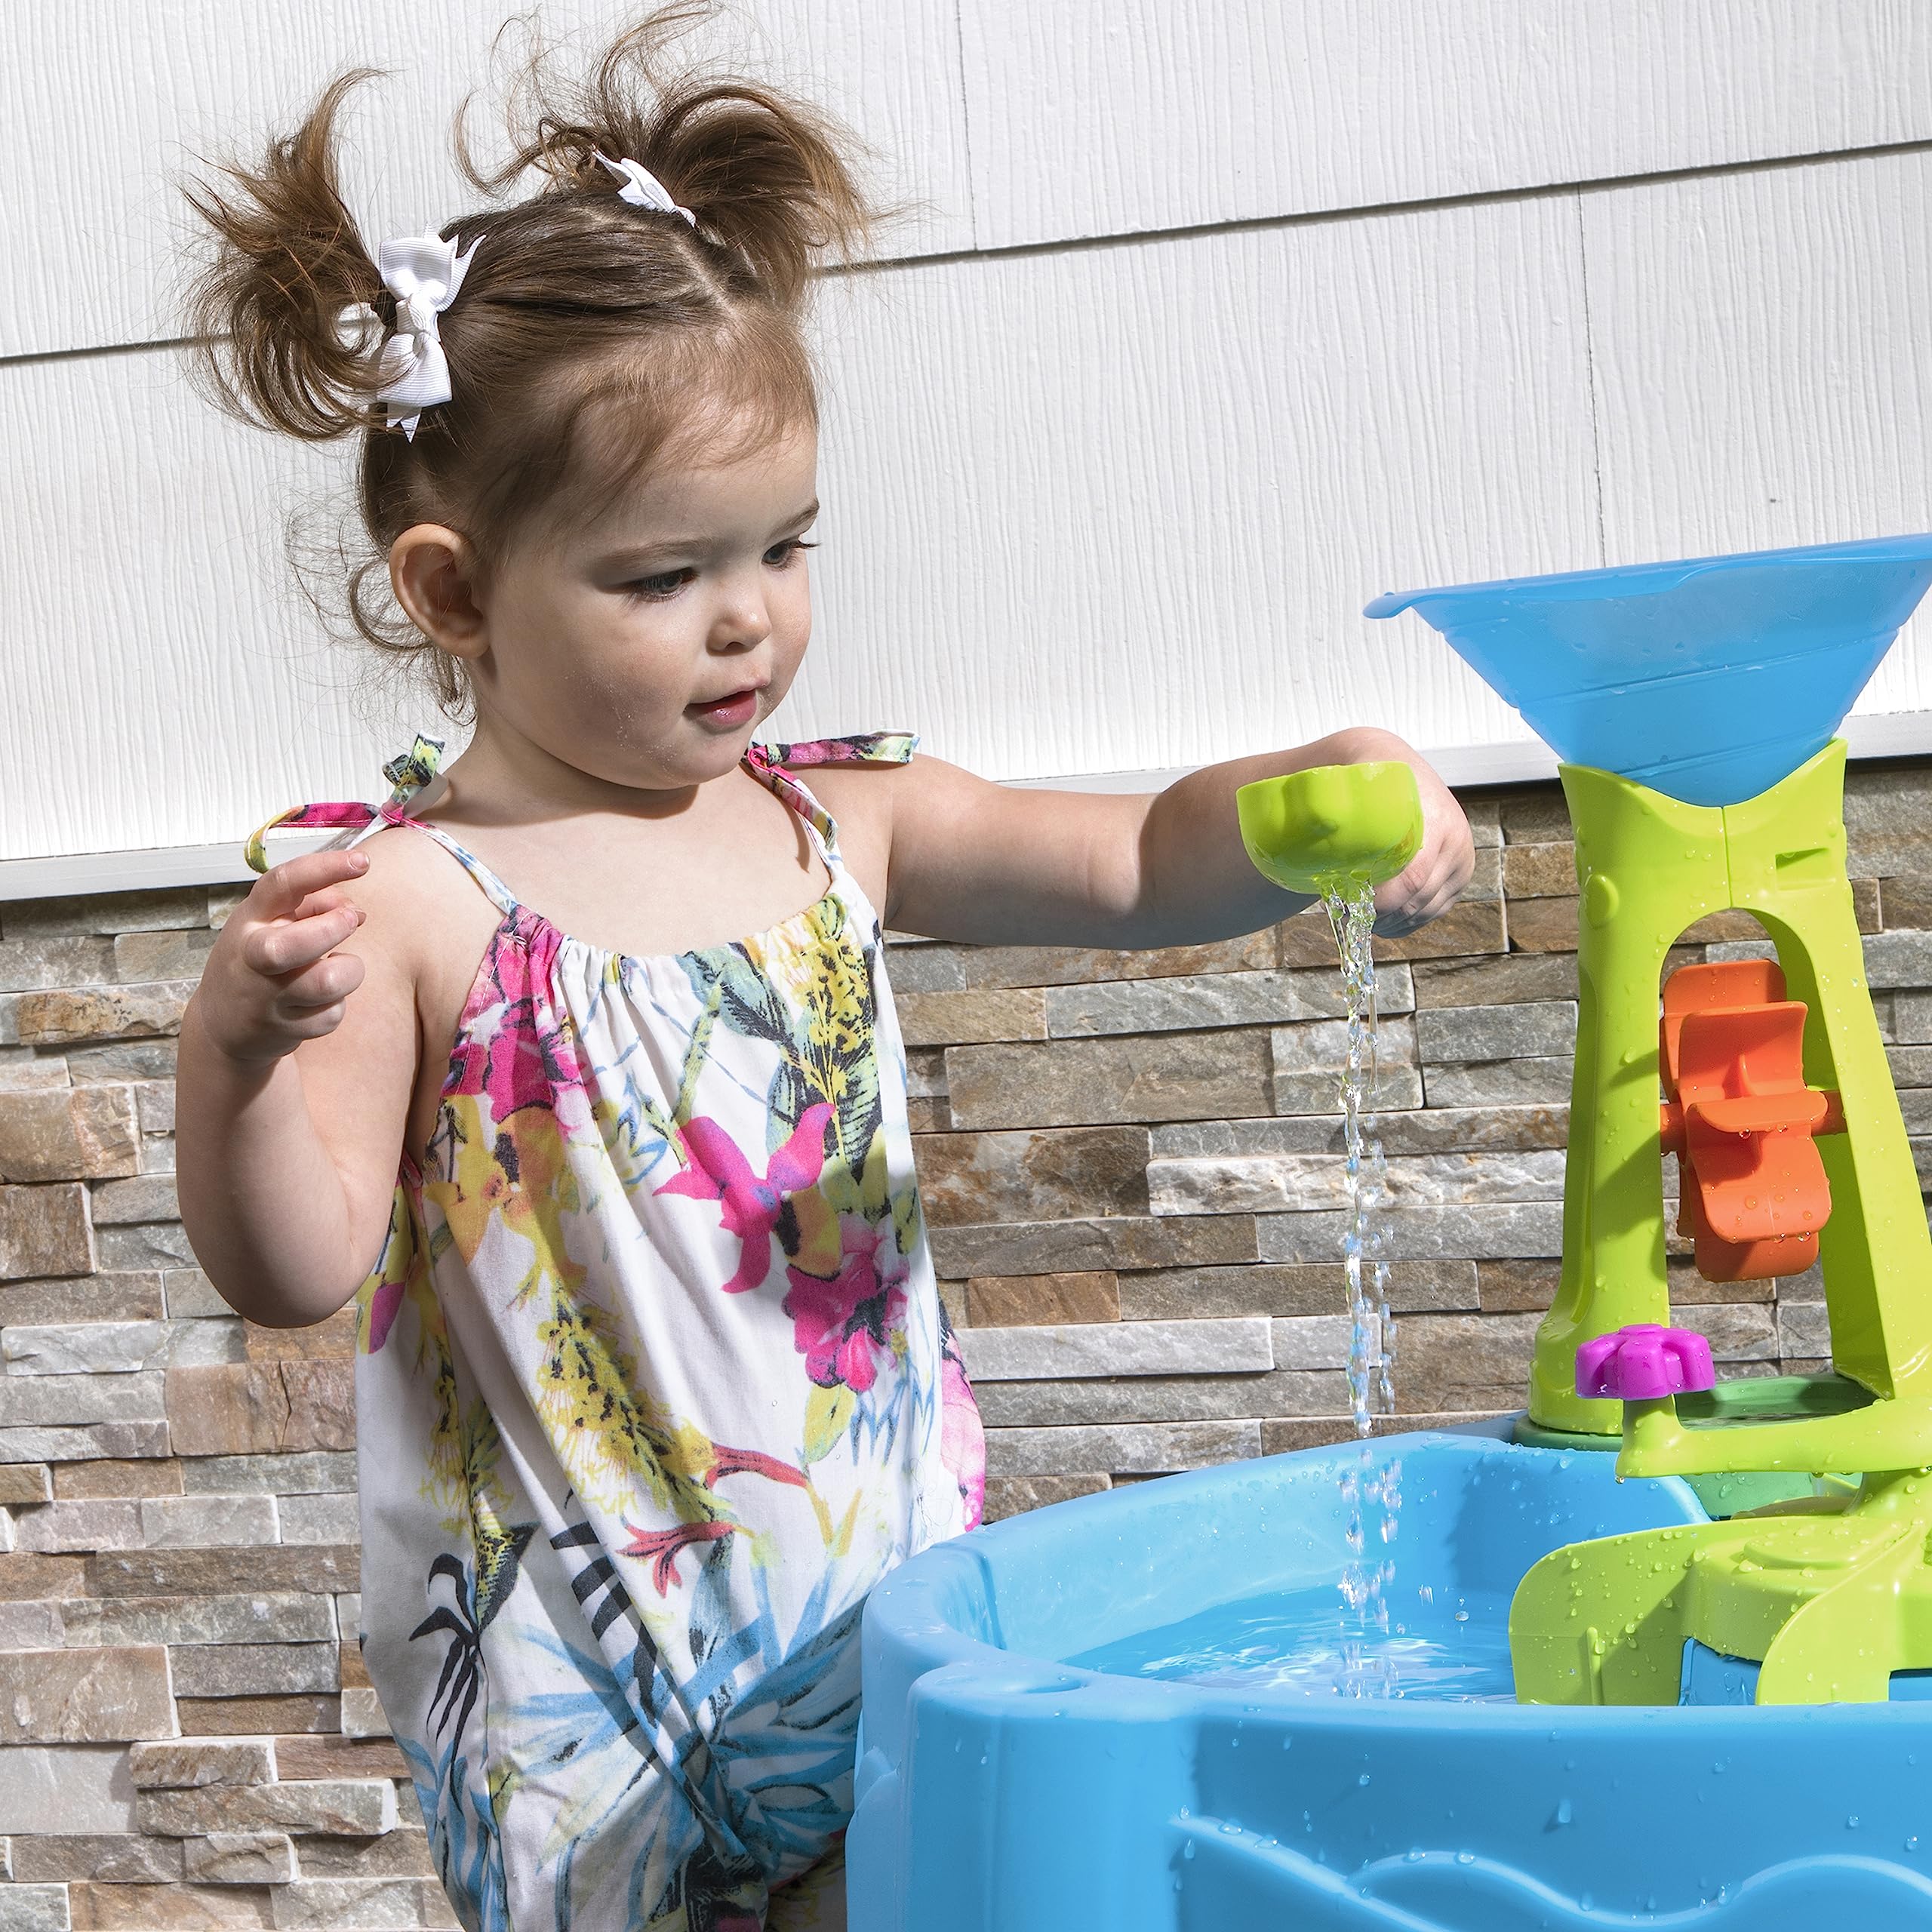 Step2 Duck Dive Kids Water Table with Water Tower & 5-Pc Accessory Set – Multicolor